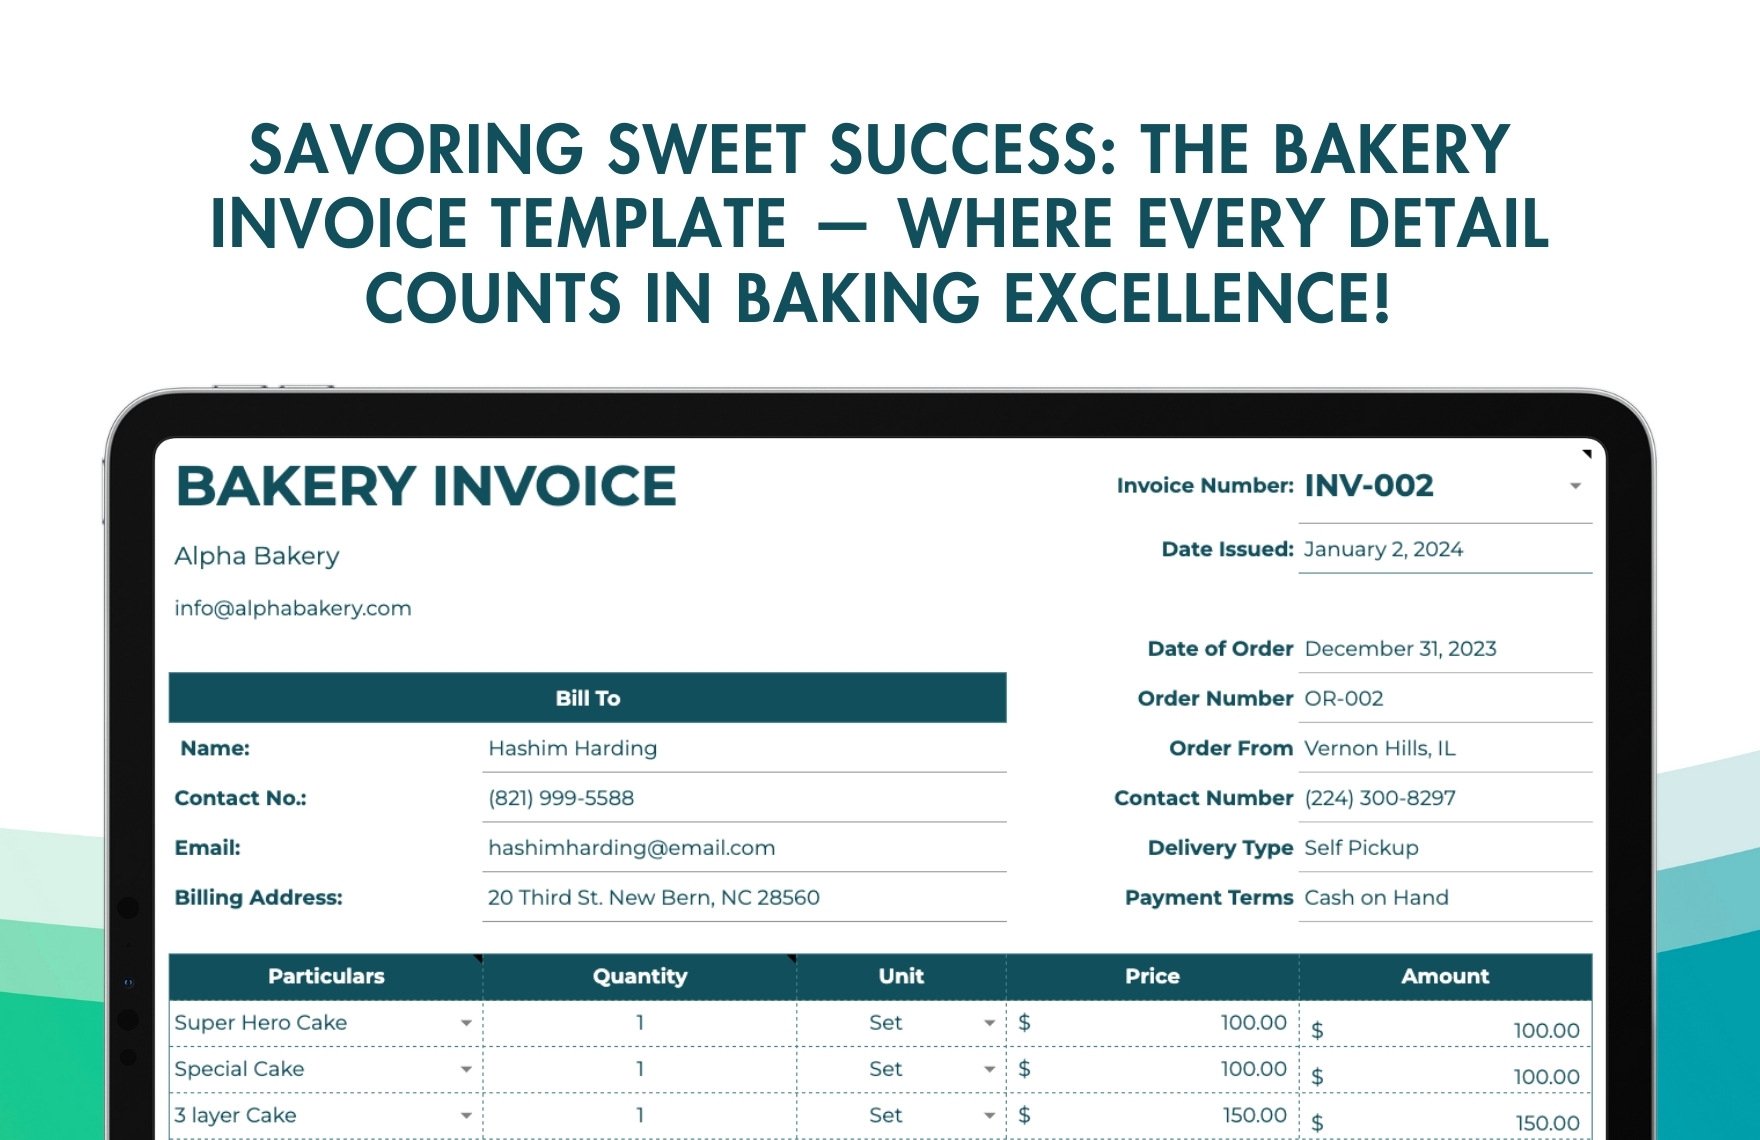 Bakery Invoice Template